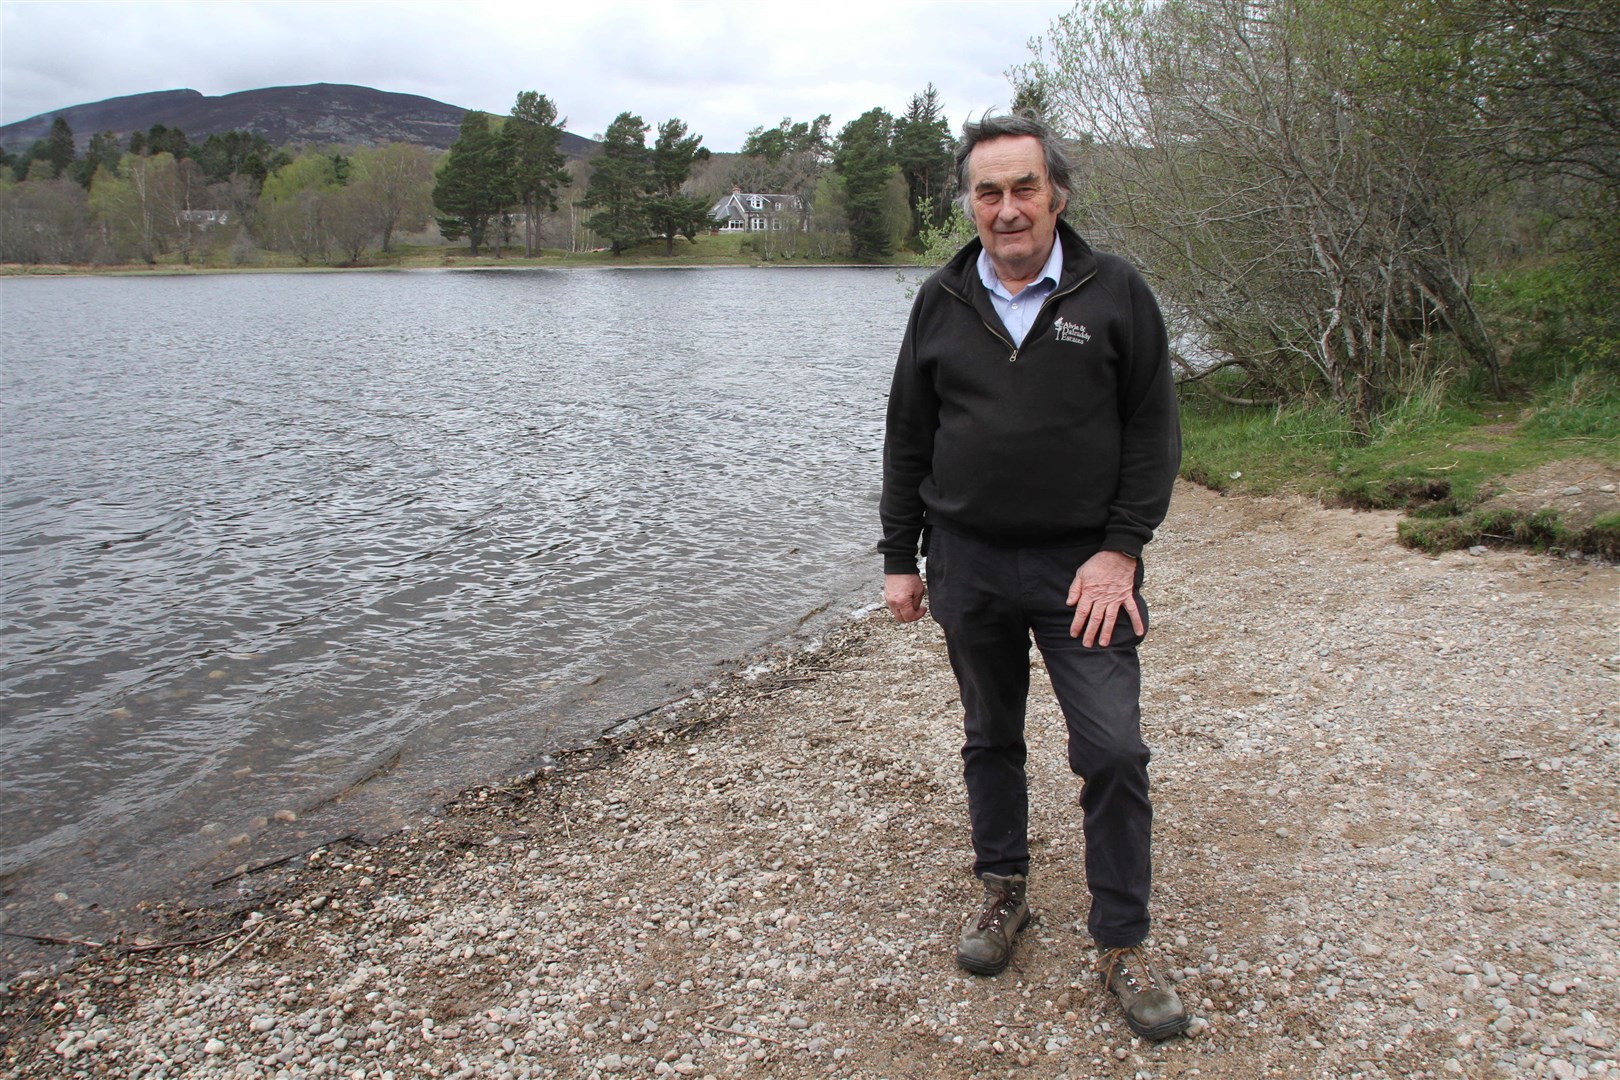 Alvie laird Jamie Williamson at the unofficial launch site at Loch Insh which is popular with kayakers and canoeists.